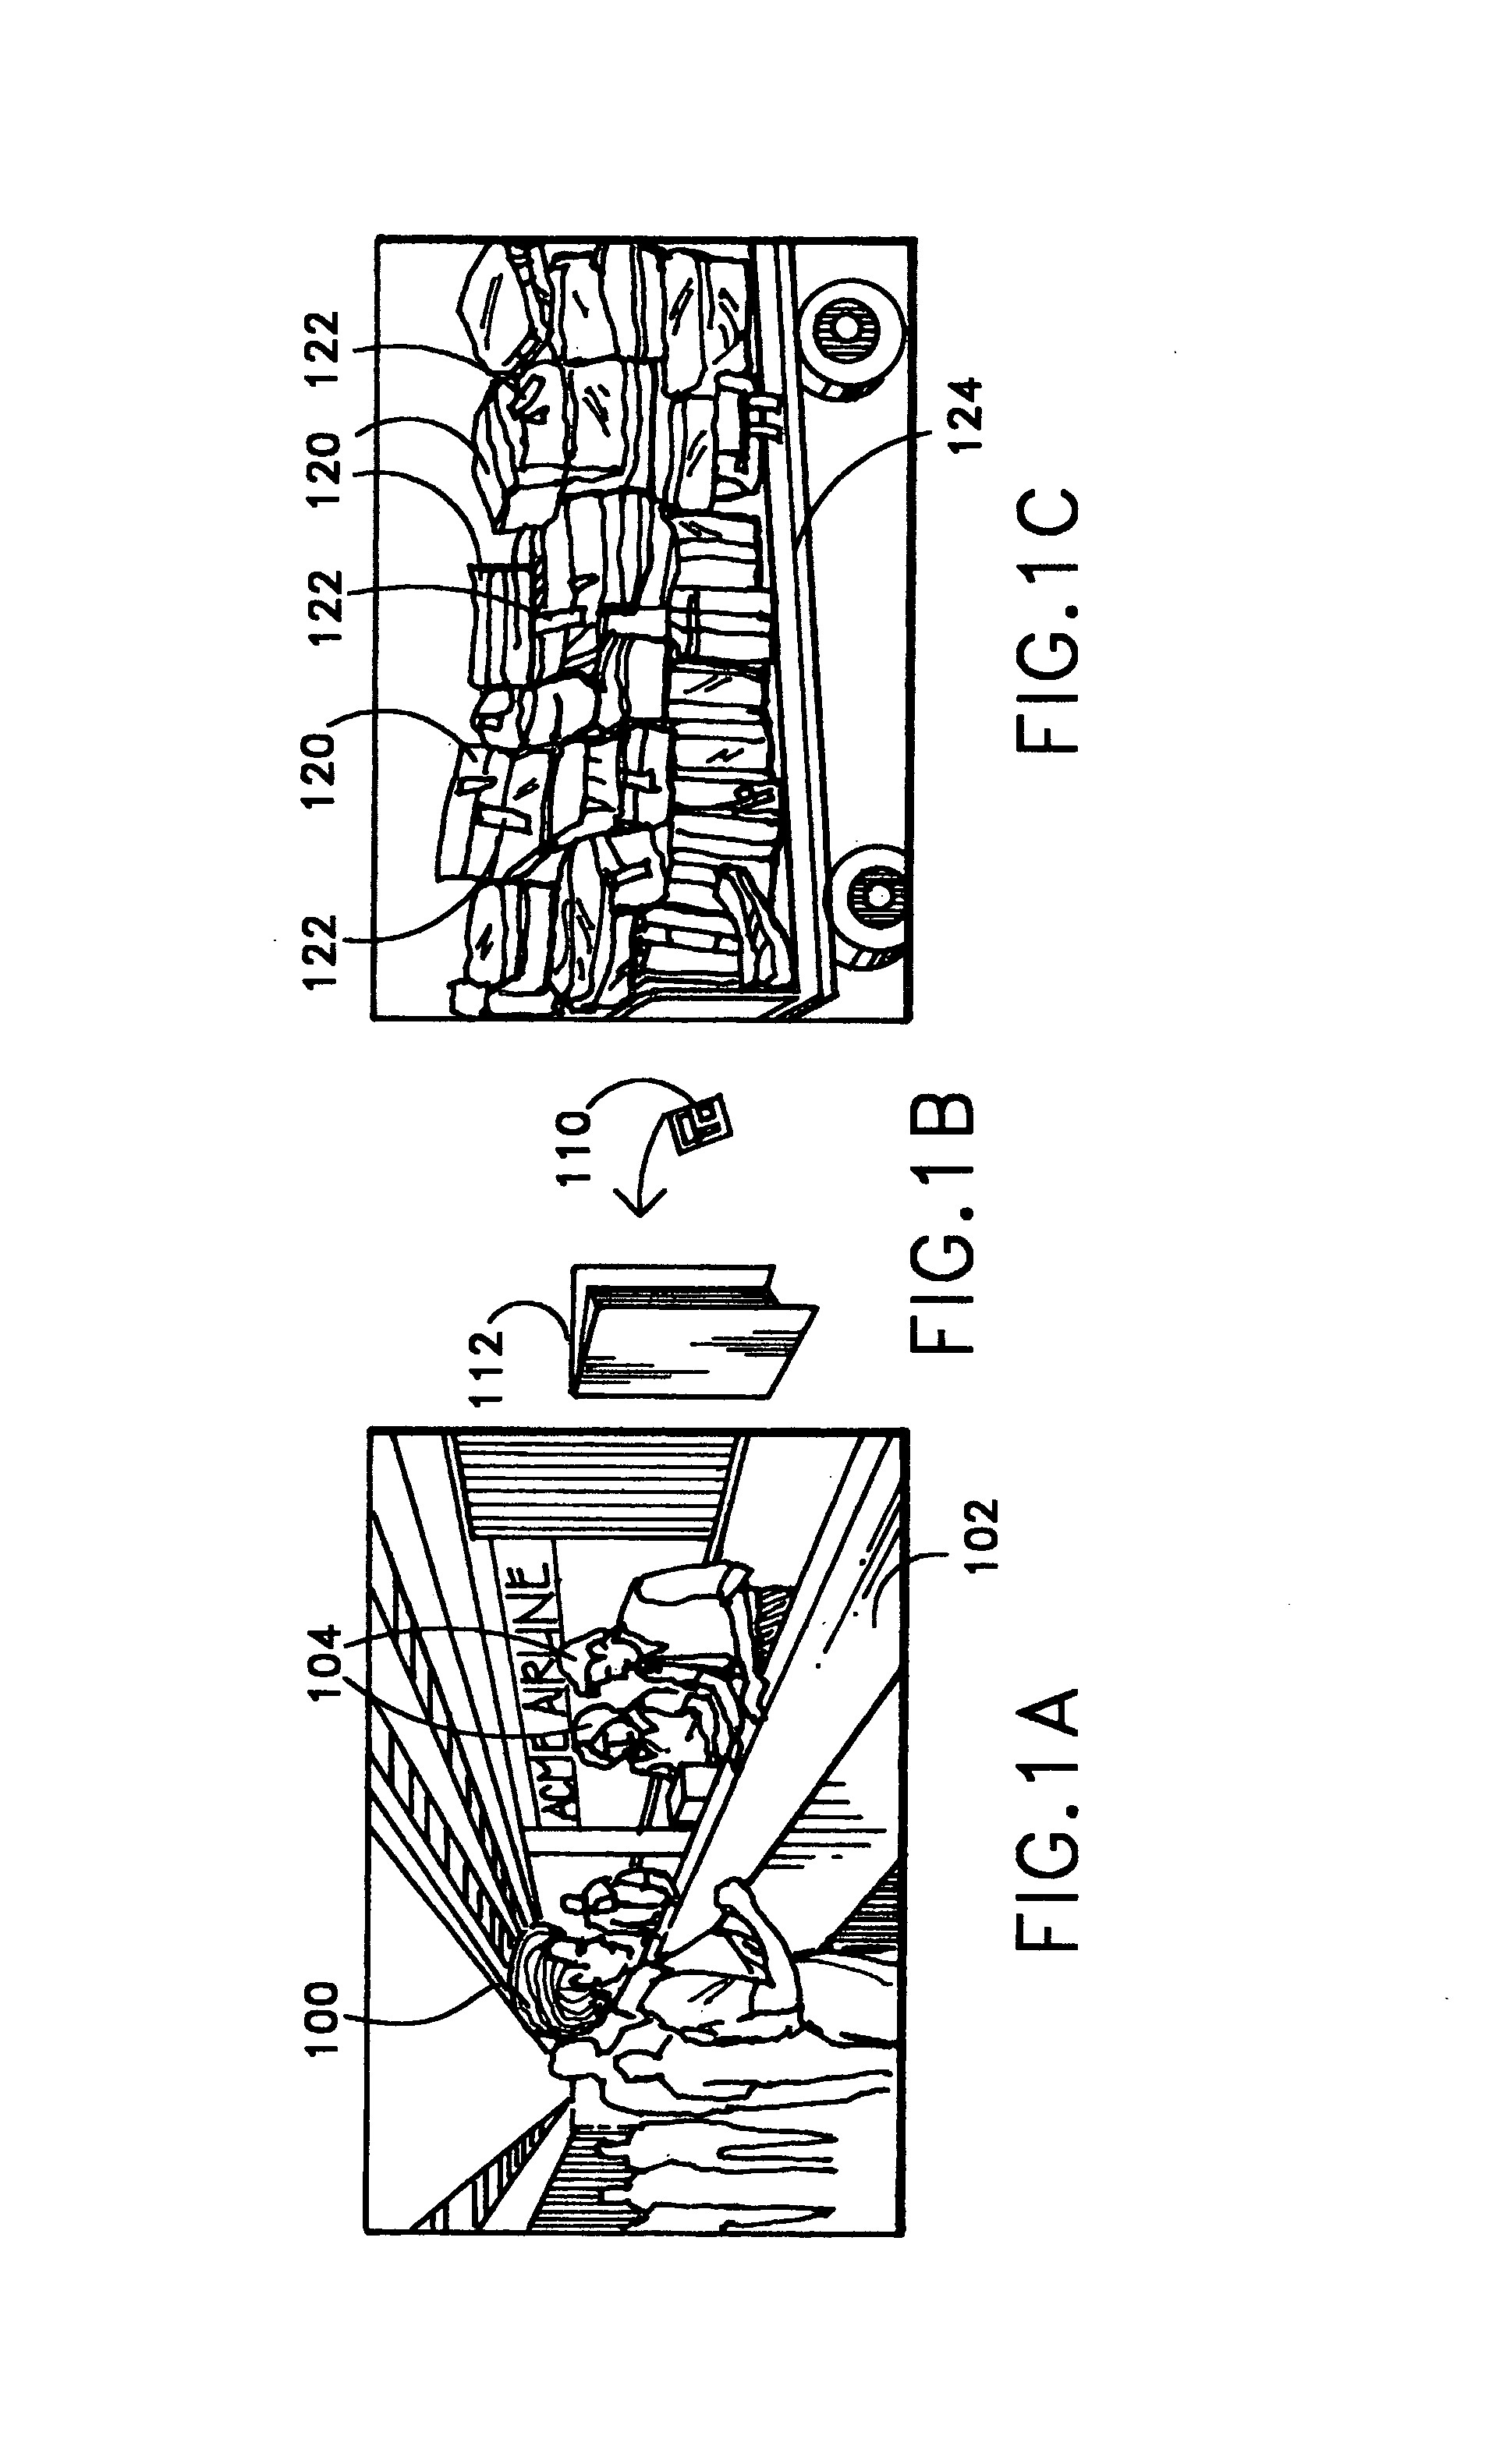 Systems and methods for location of objects